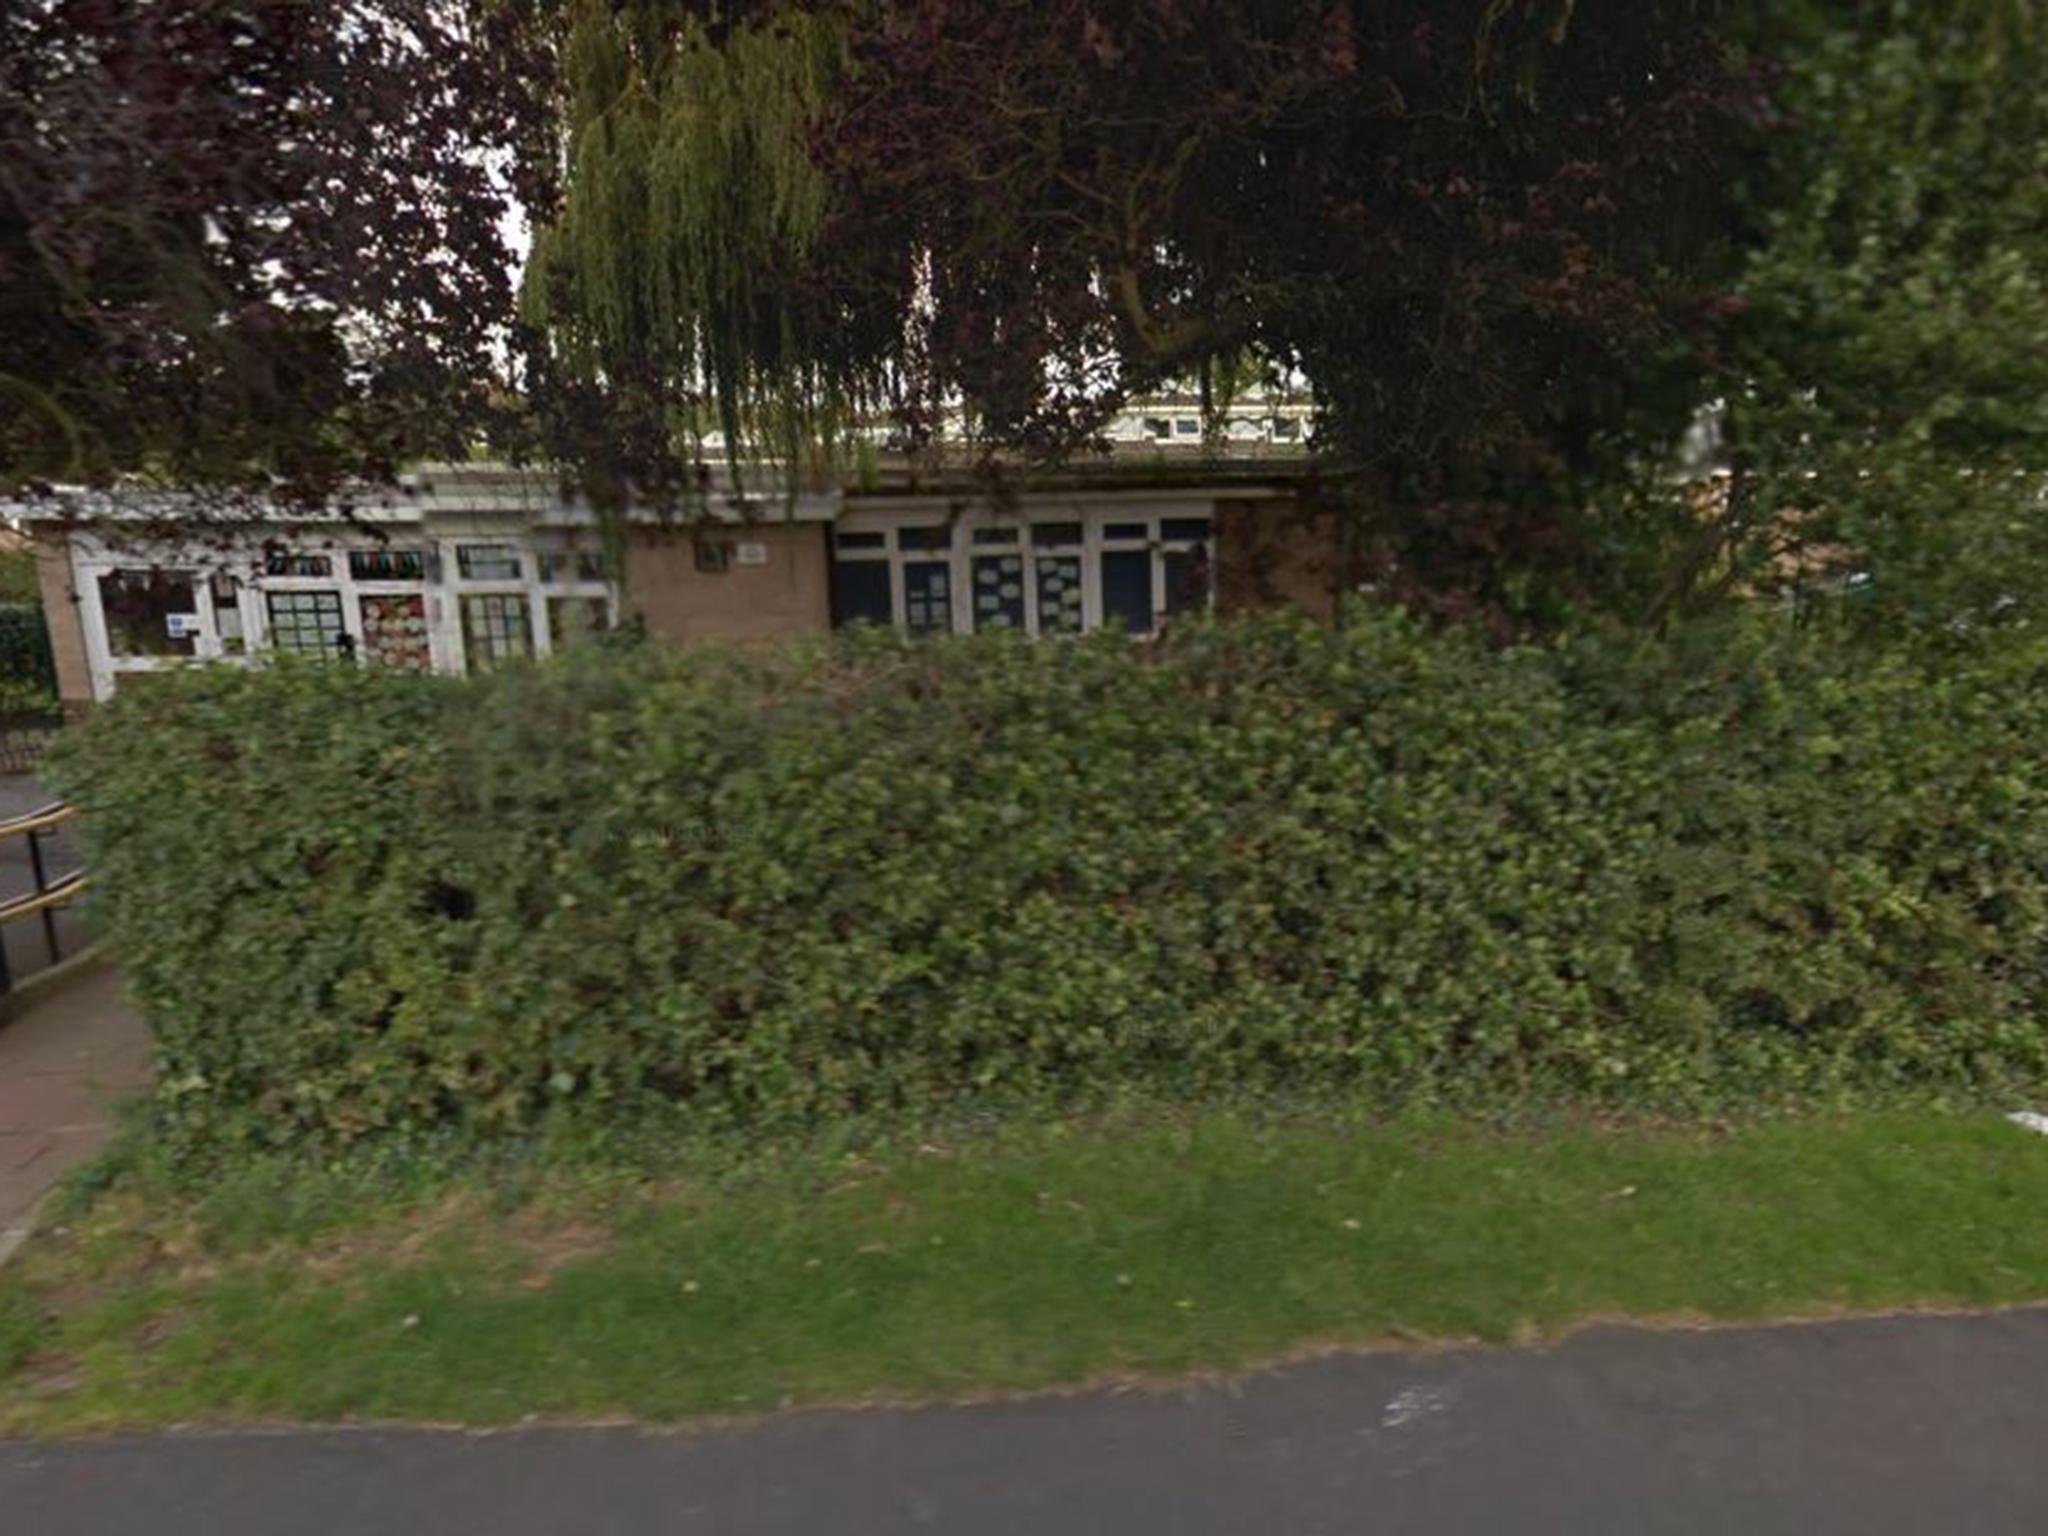 The boy was pronounced dead at the scene at Anlaby Primary School in Hull